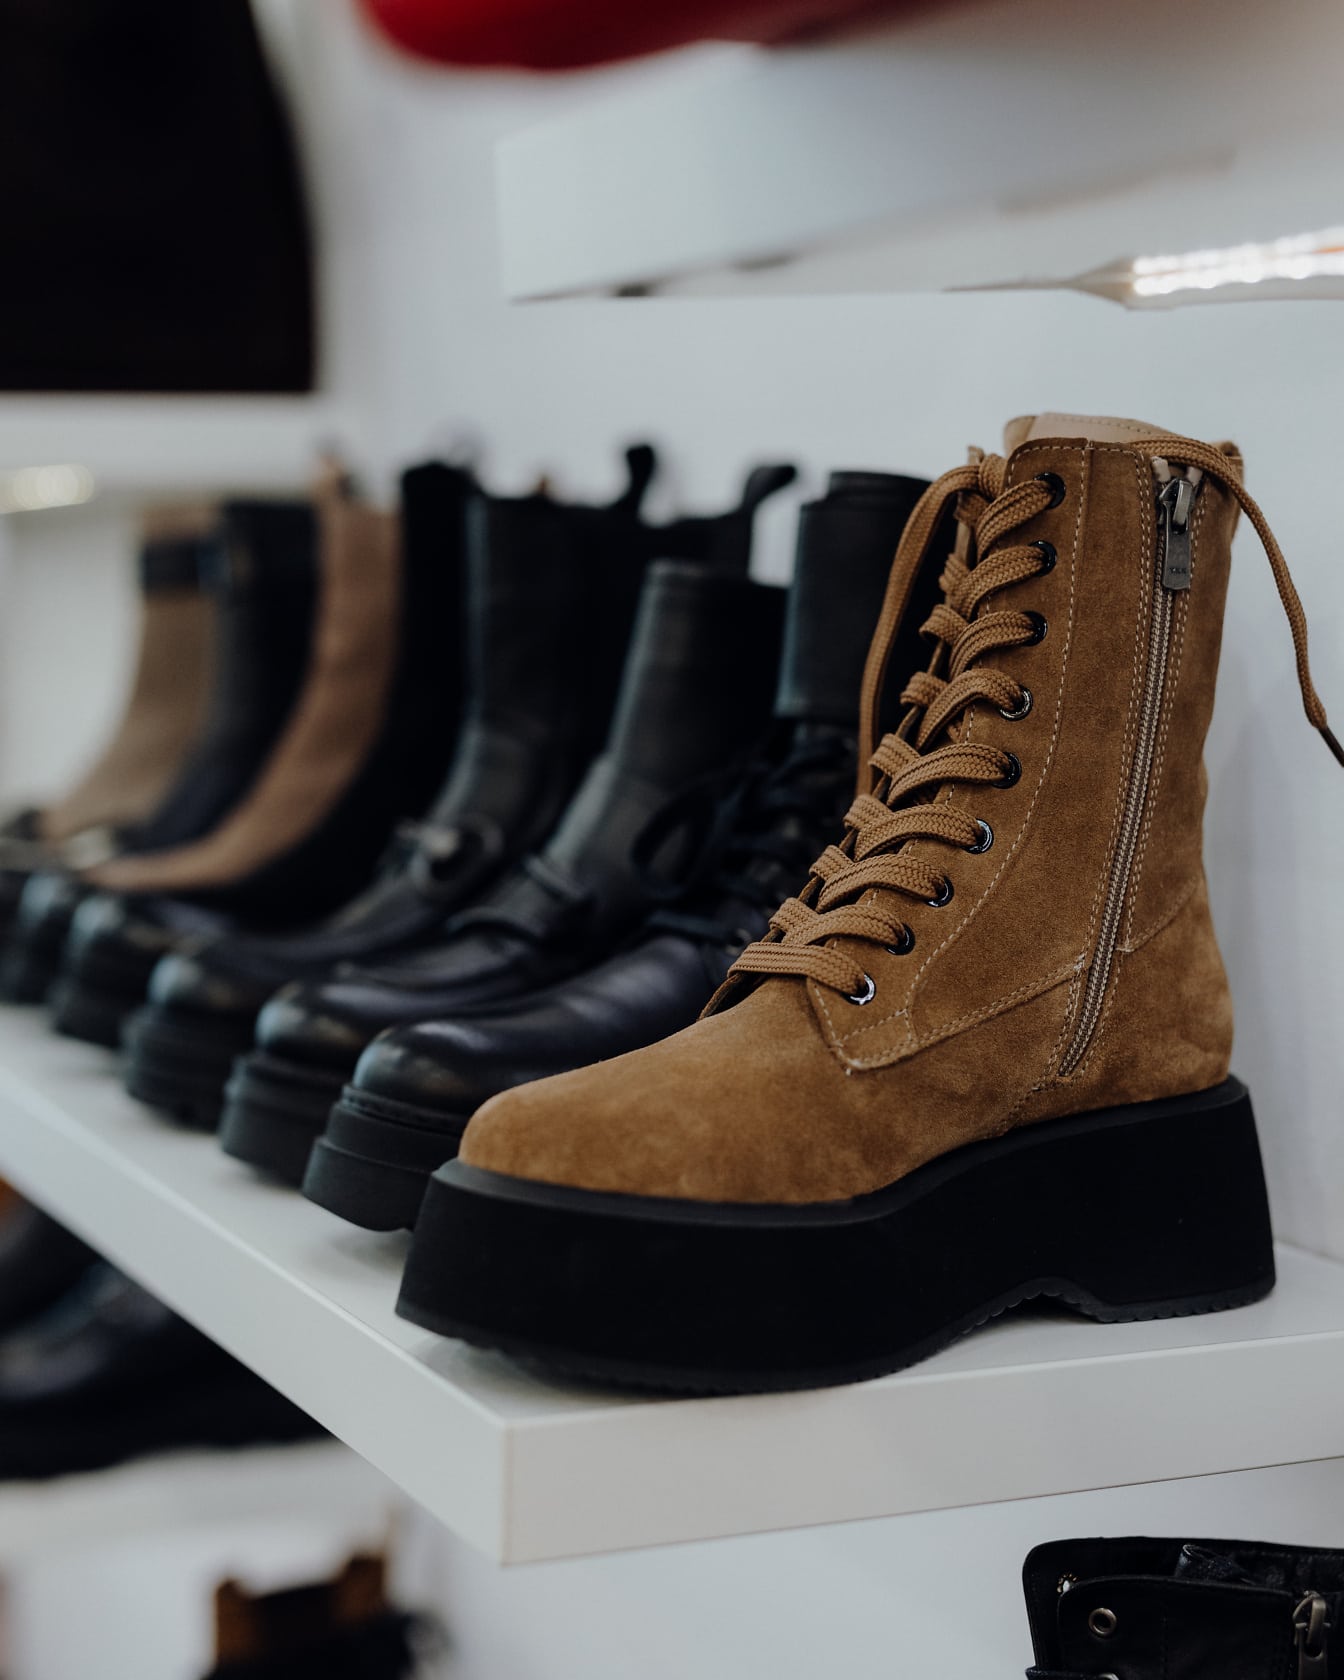 Row of boots on a shelf with brown leather boot in foreground